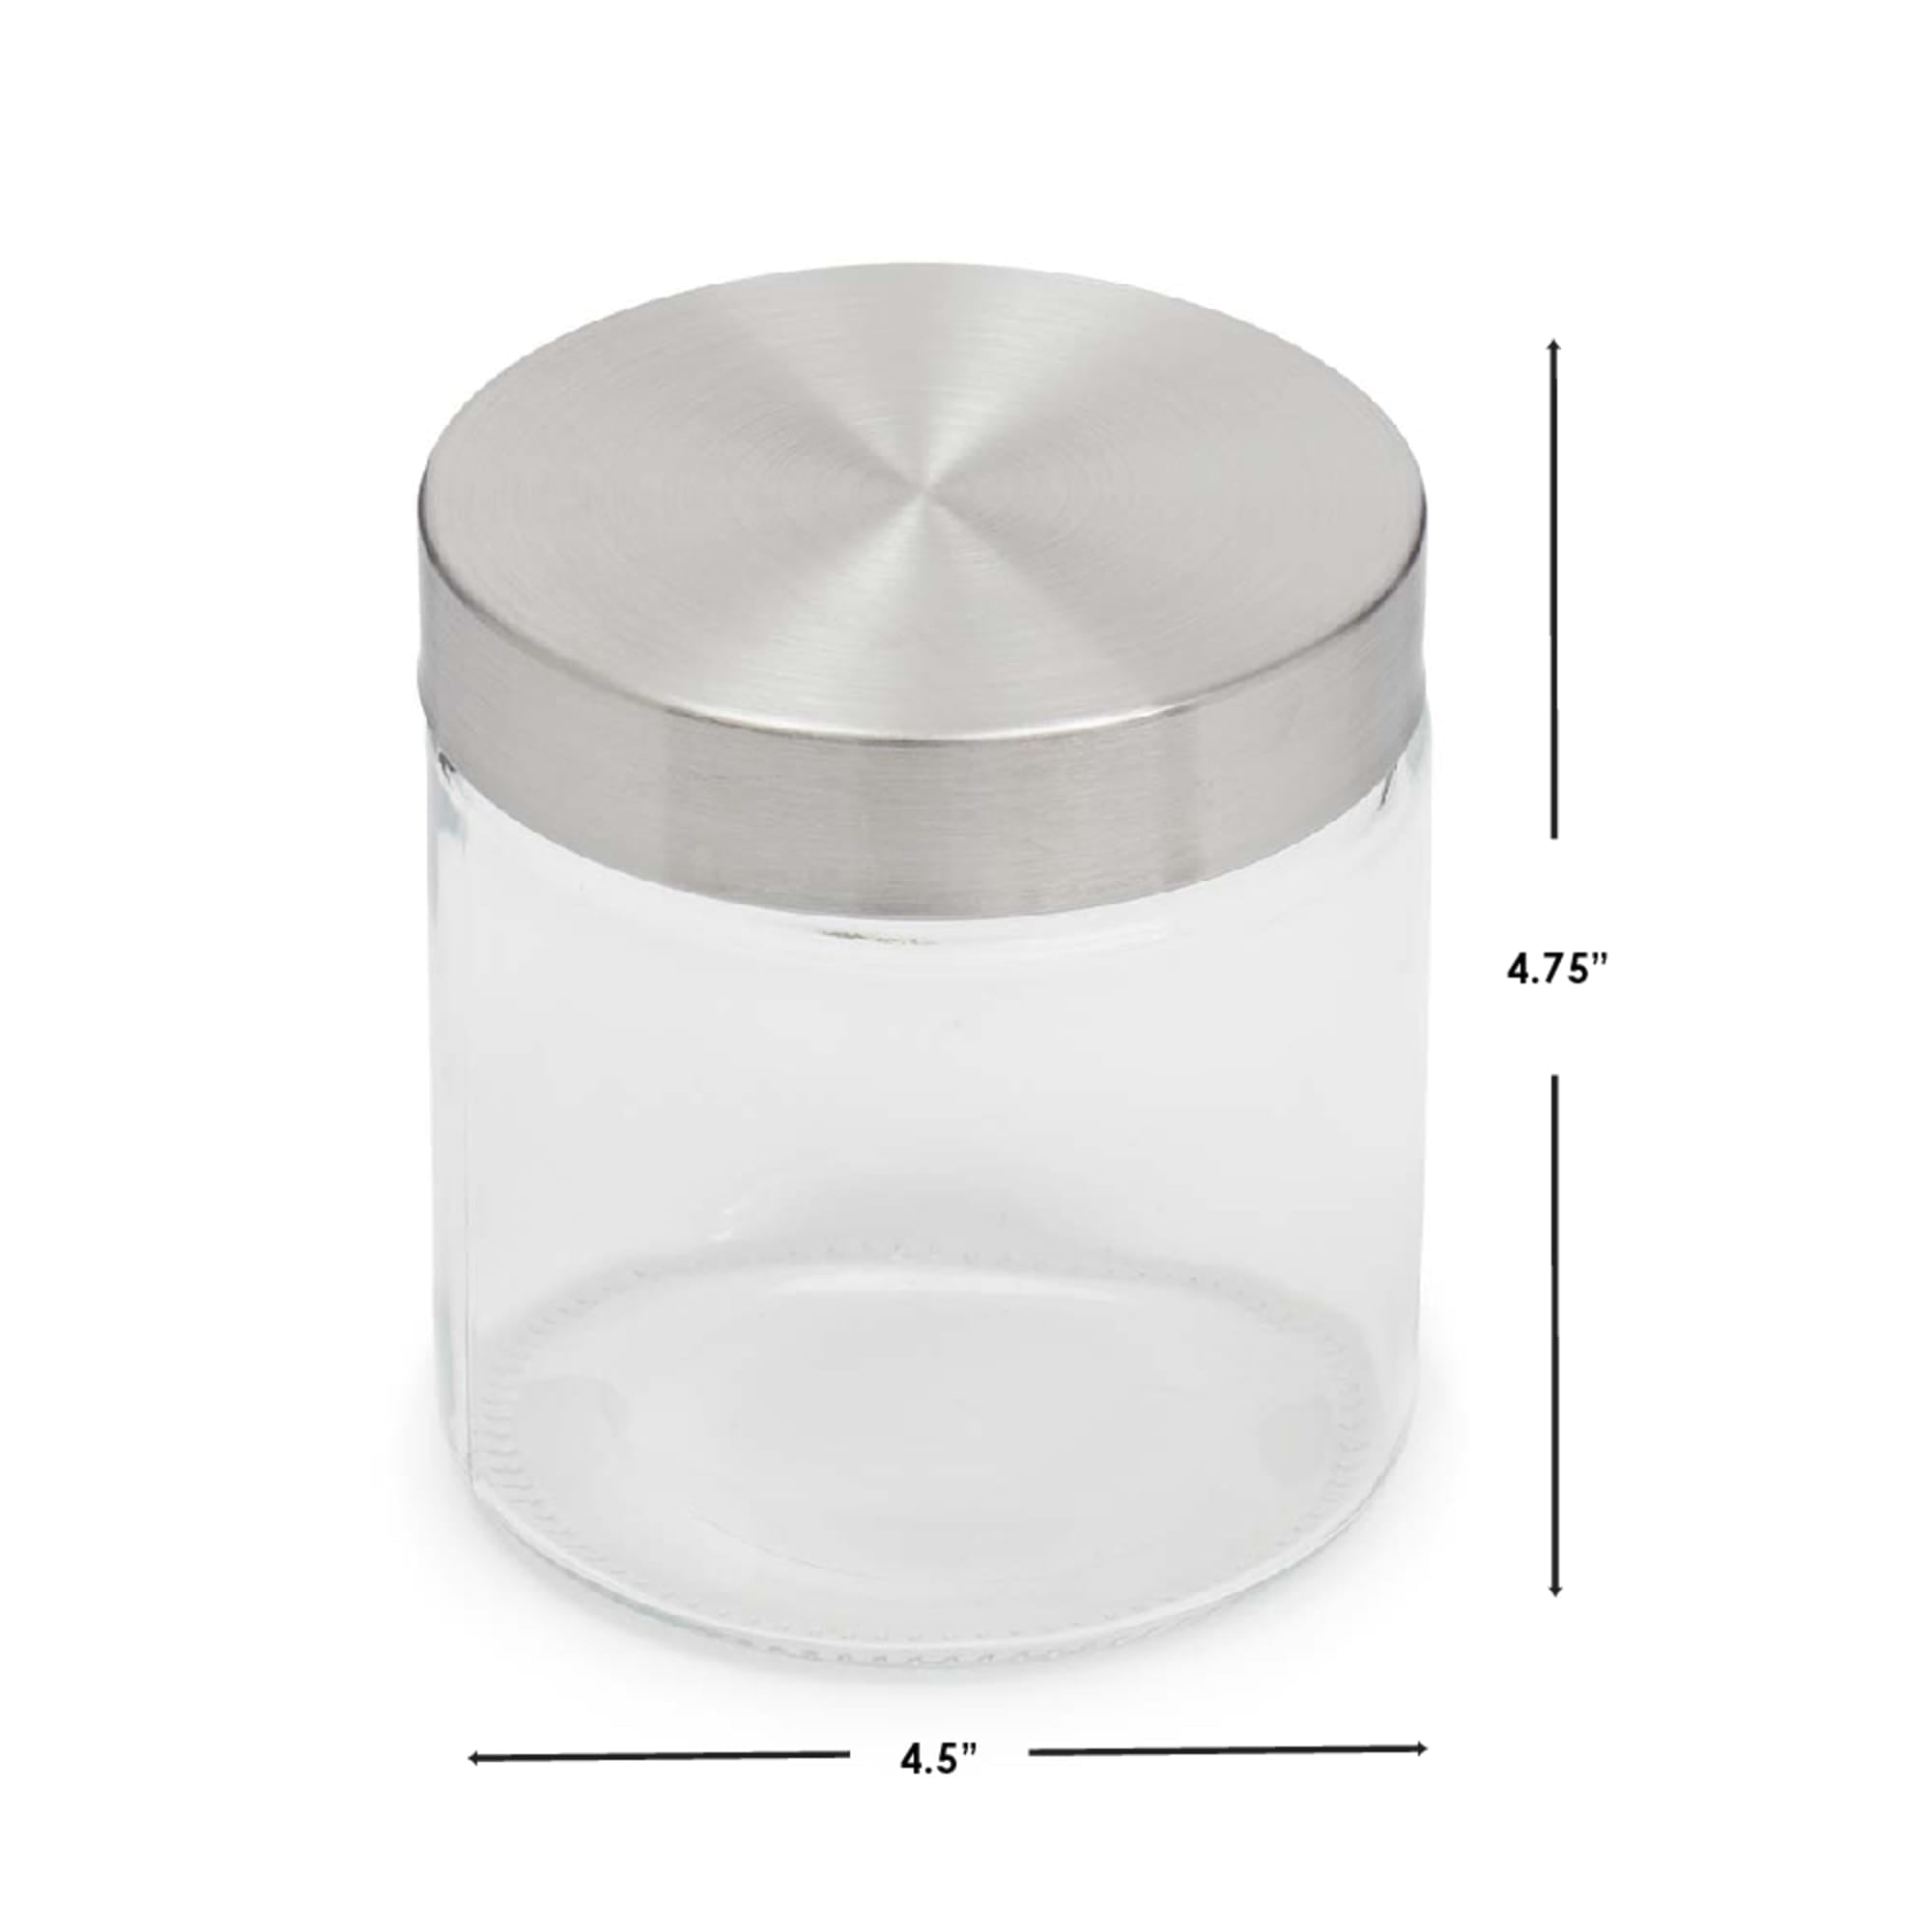 Home Basics Small 25 oz. Round Glass Canister with Air-Tight Stainless Steel Twist Top Lid, Clear $2.00 EACH, CASE PACK OF 24